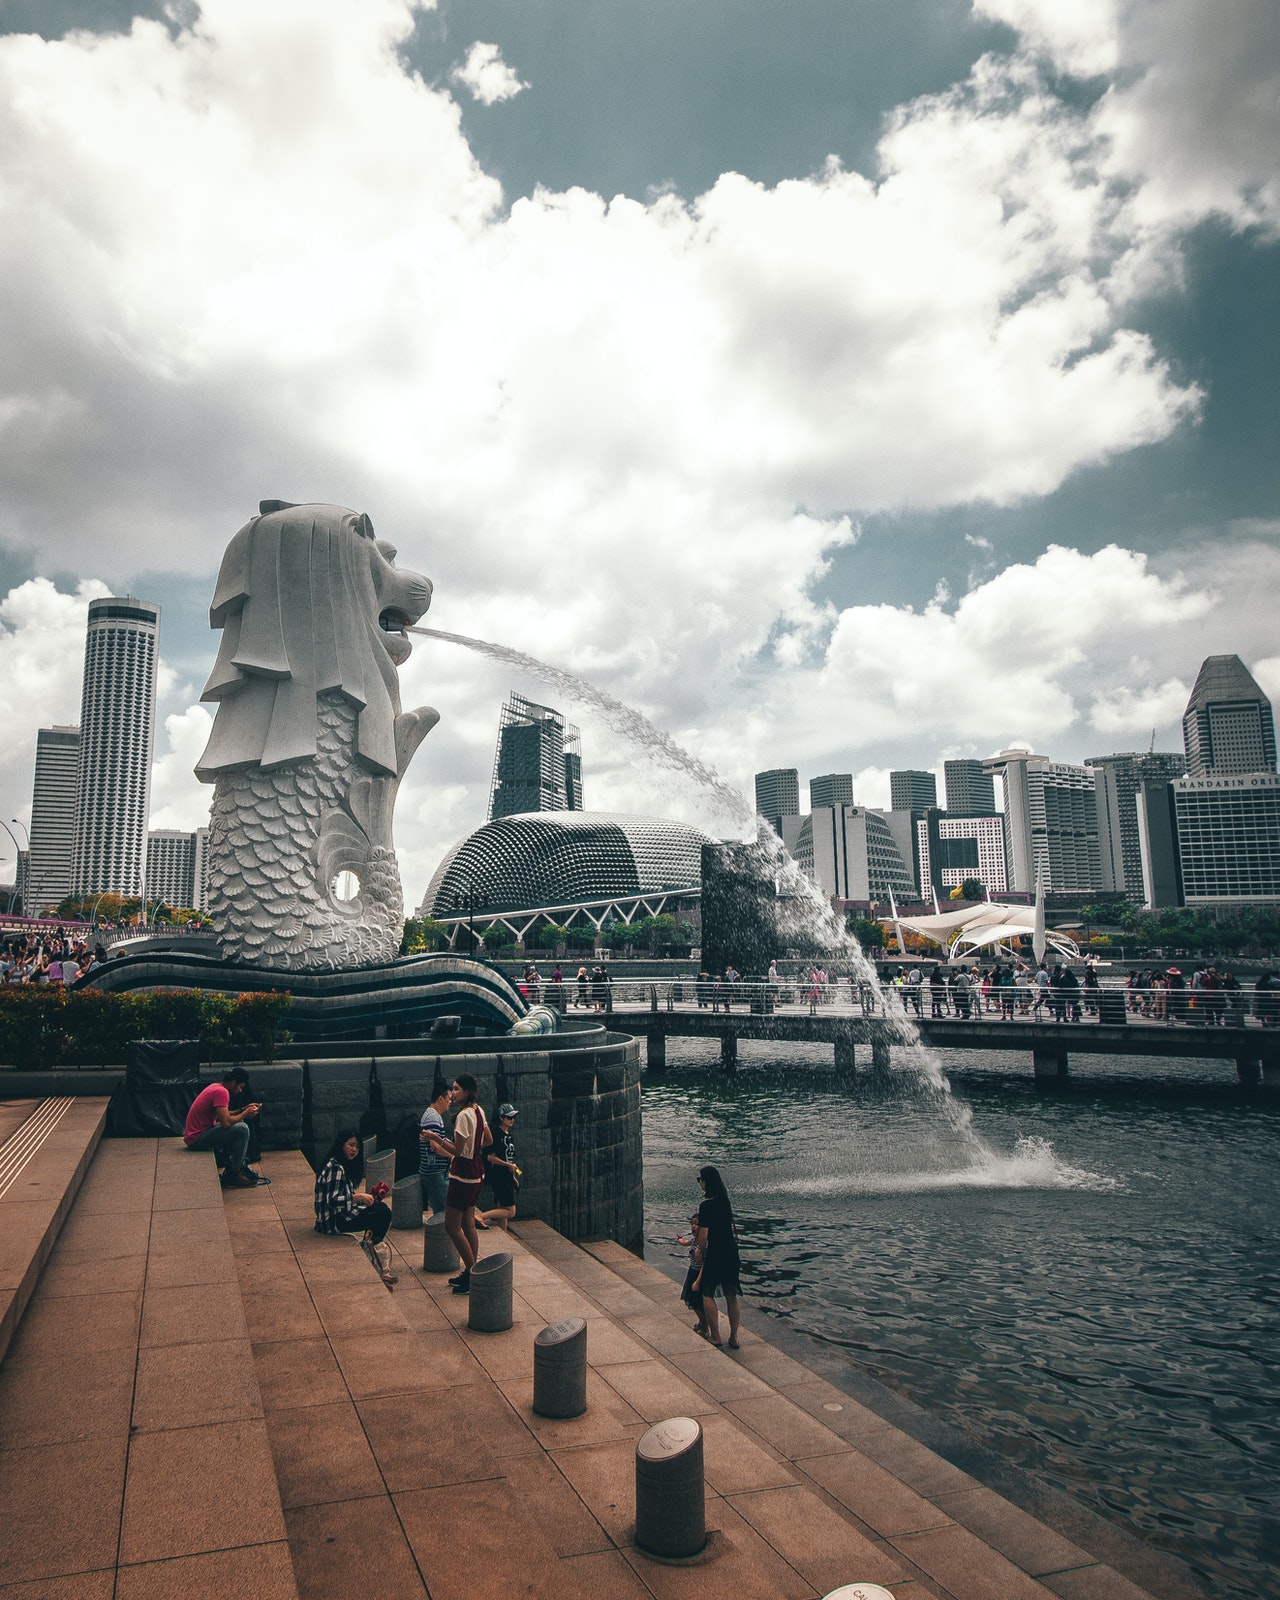 Finding my feet in Singapore - part 1